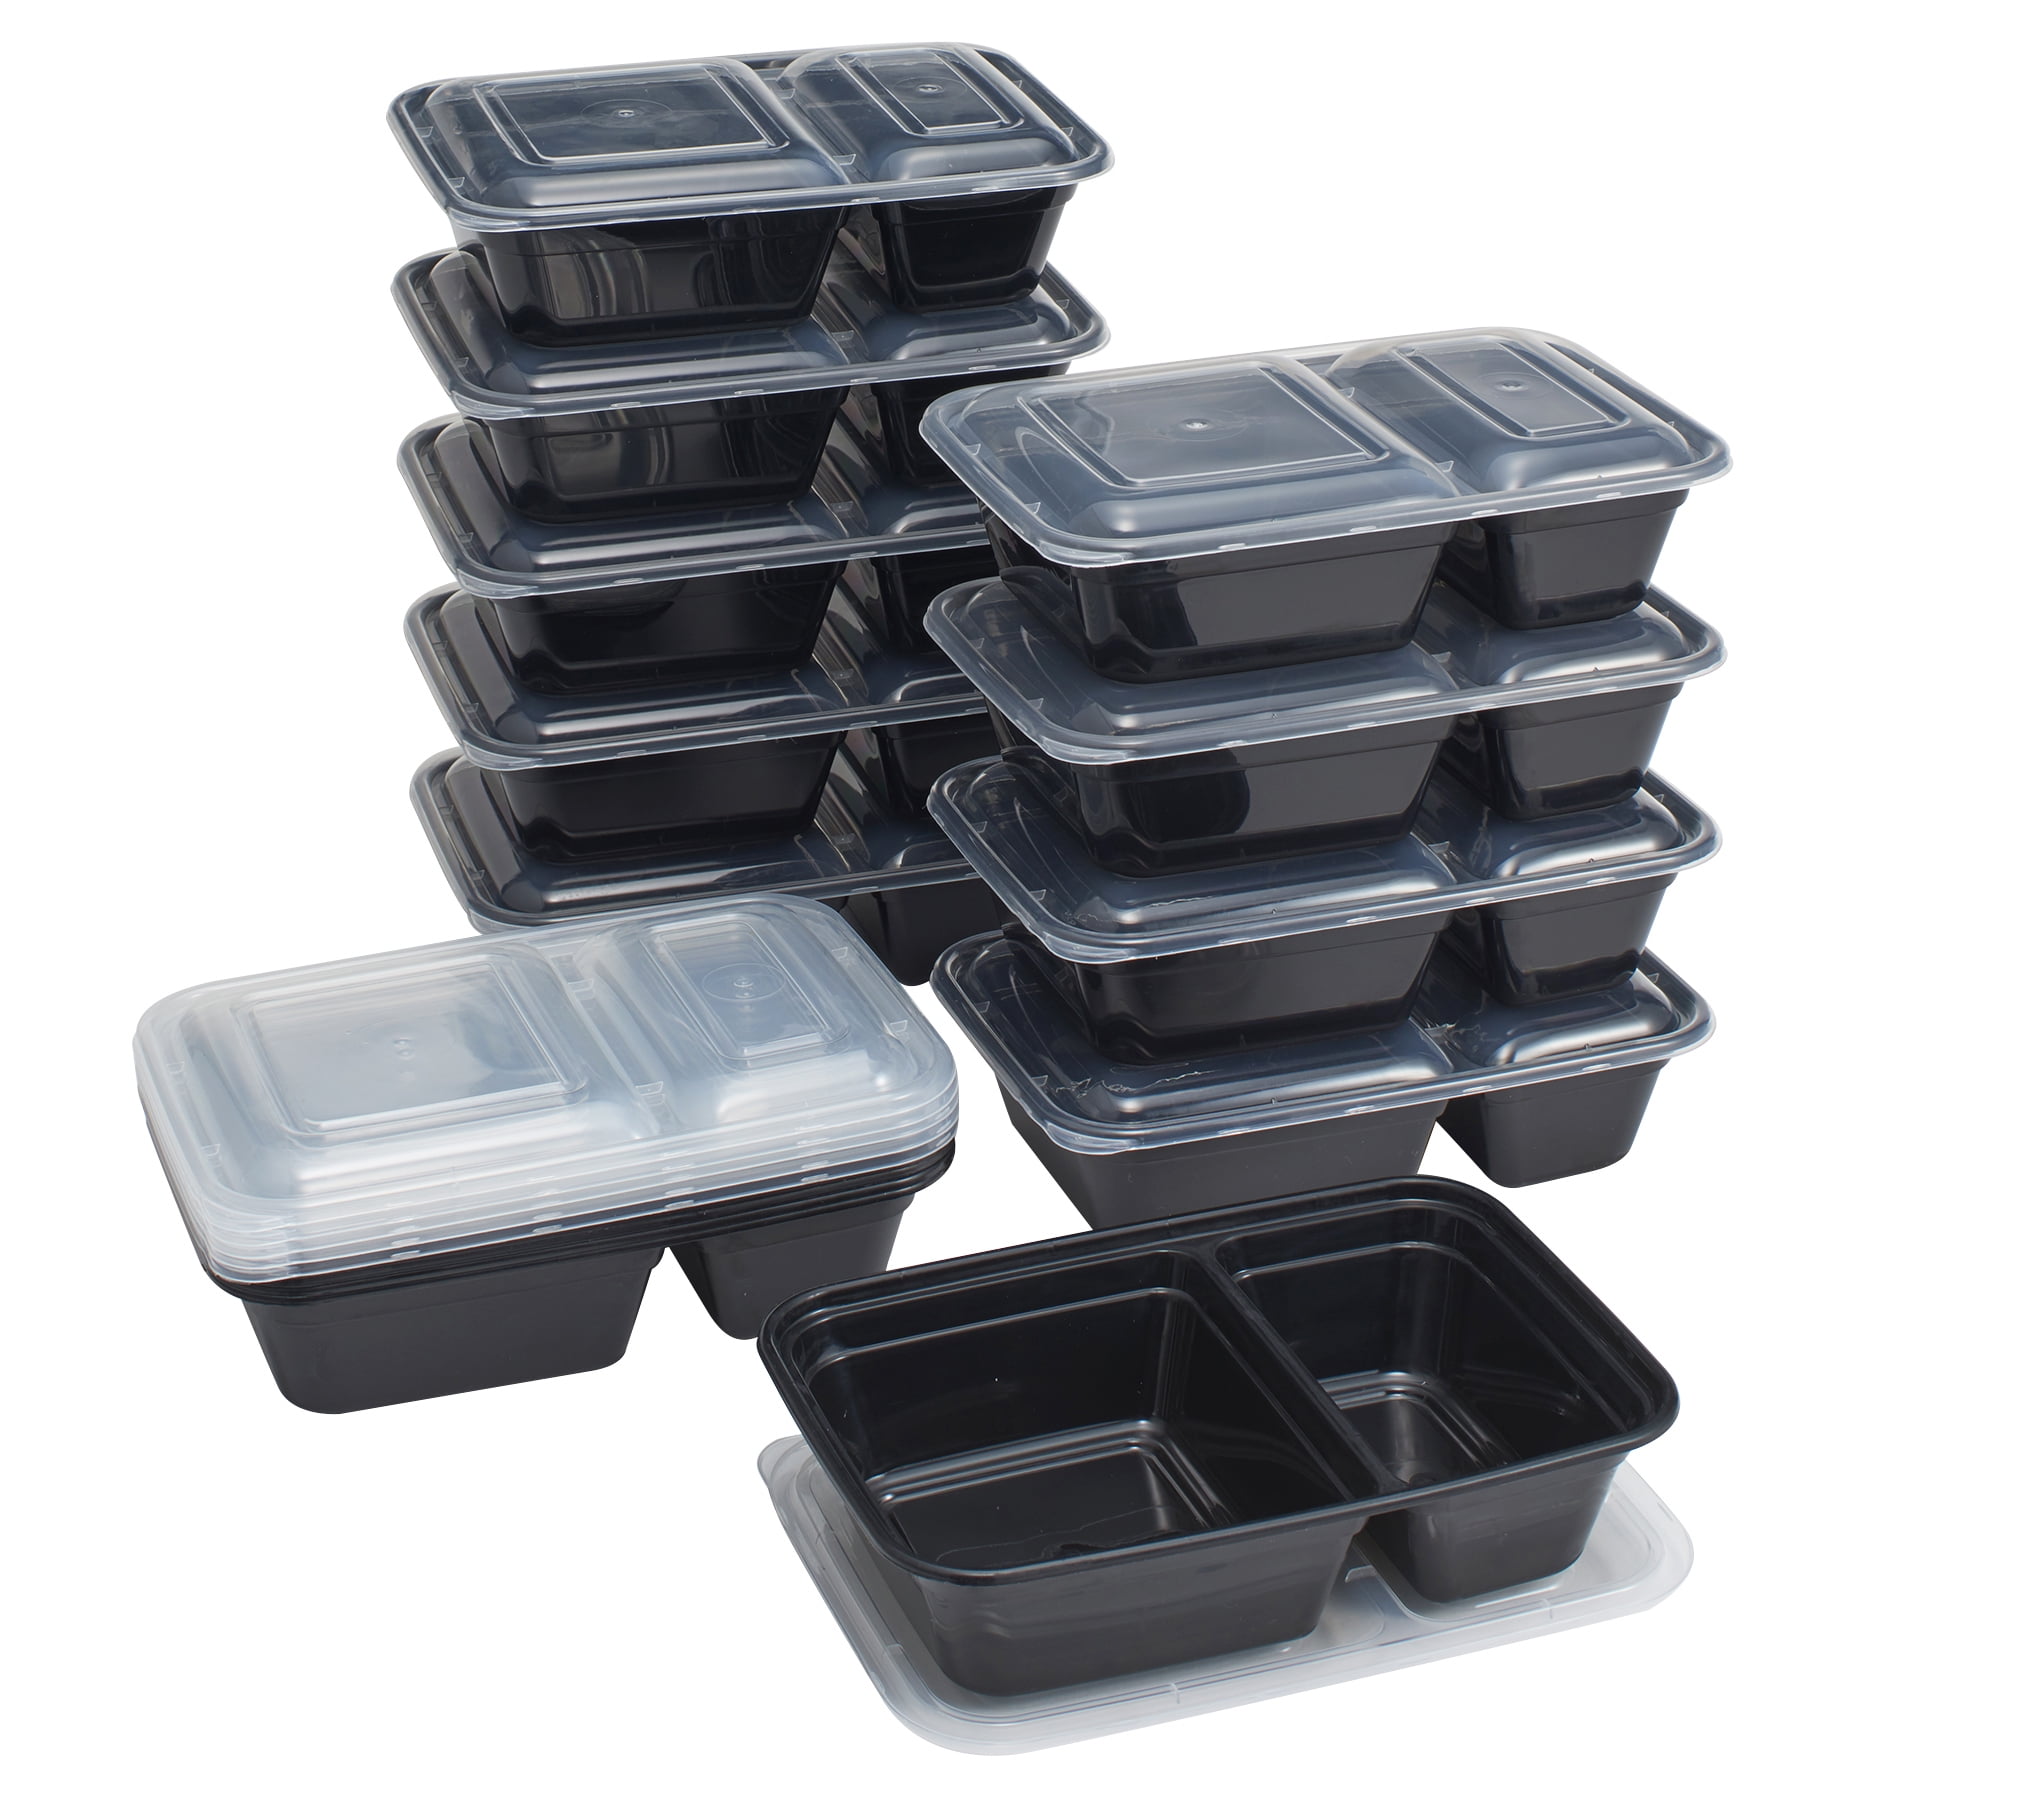 Heim Concept Premium Meal Prep Food Containers w/ Lid 3 Compartment Reusable Stackable 10-Pack, Size: 2 x 9 x 5 Inches, 3 Compartments, Black